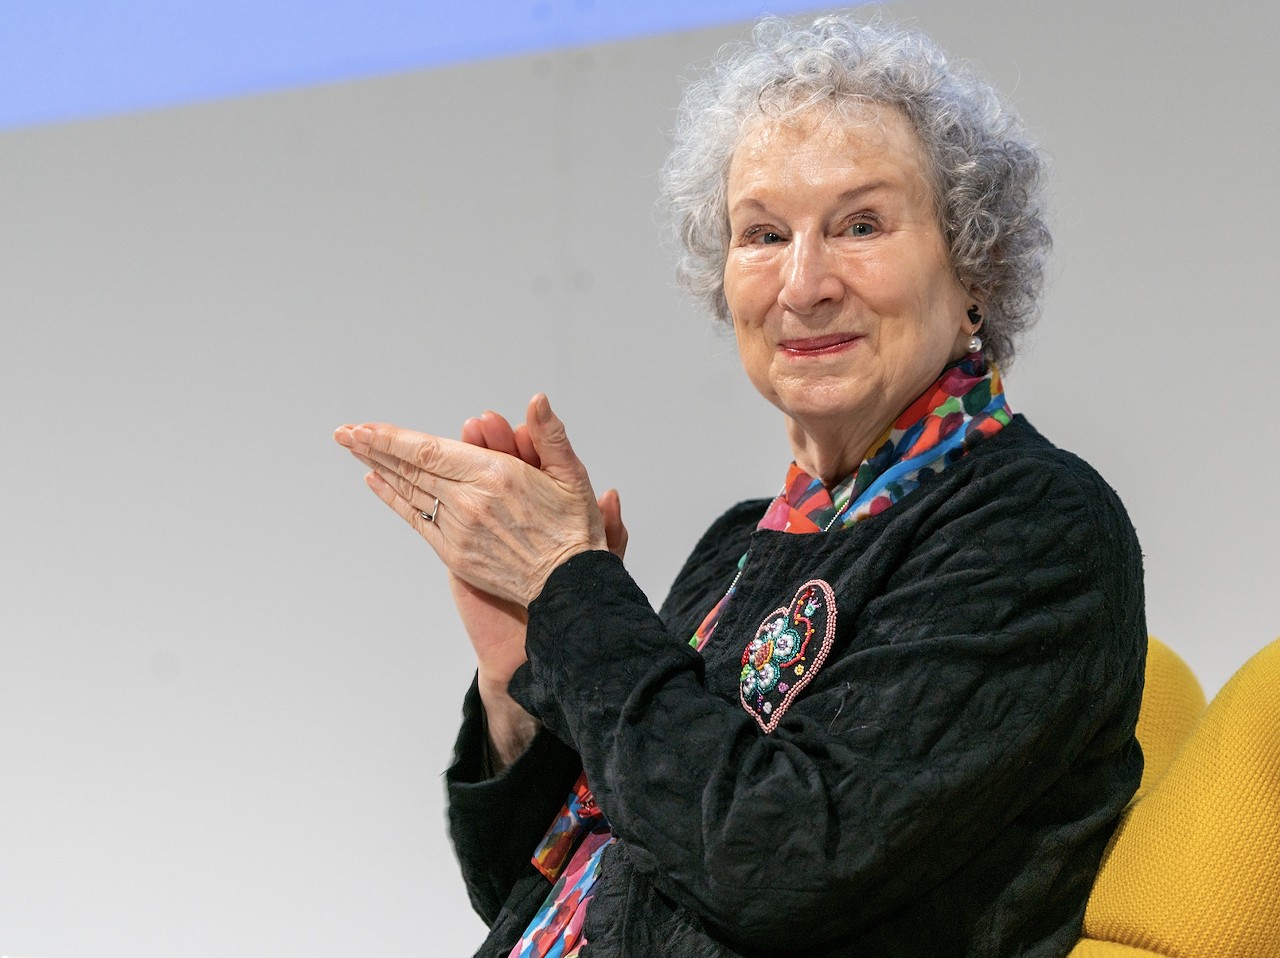 Margaret Atwood
The Handmaid’s Tale author Margaret Atwood served as writer in residence at Trinity University during the late 1980s.